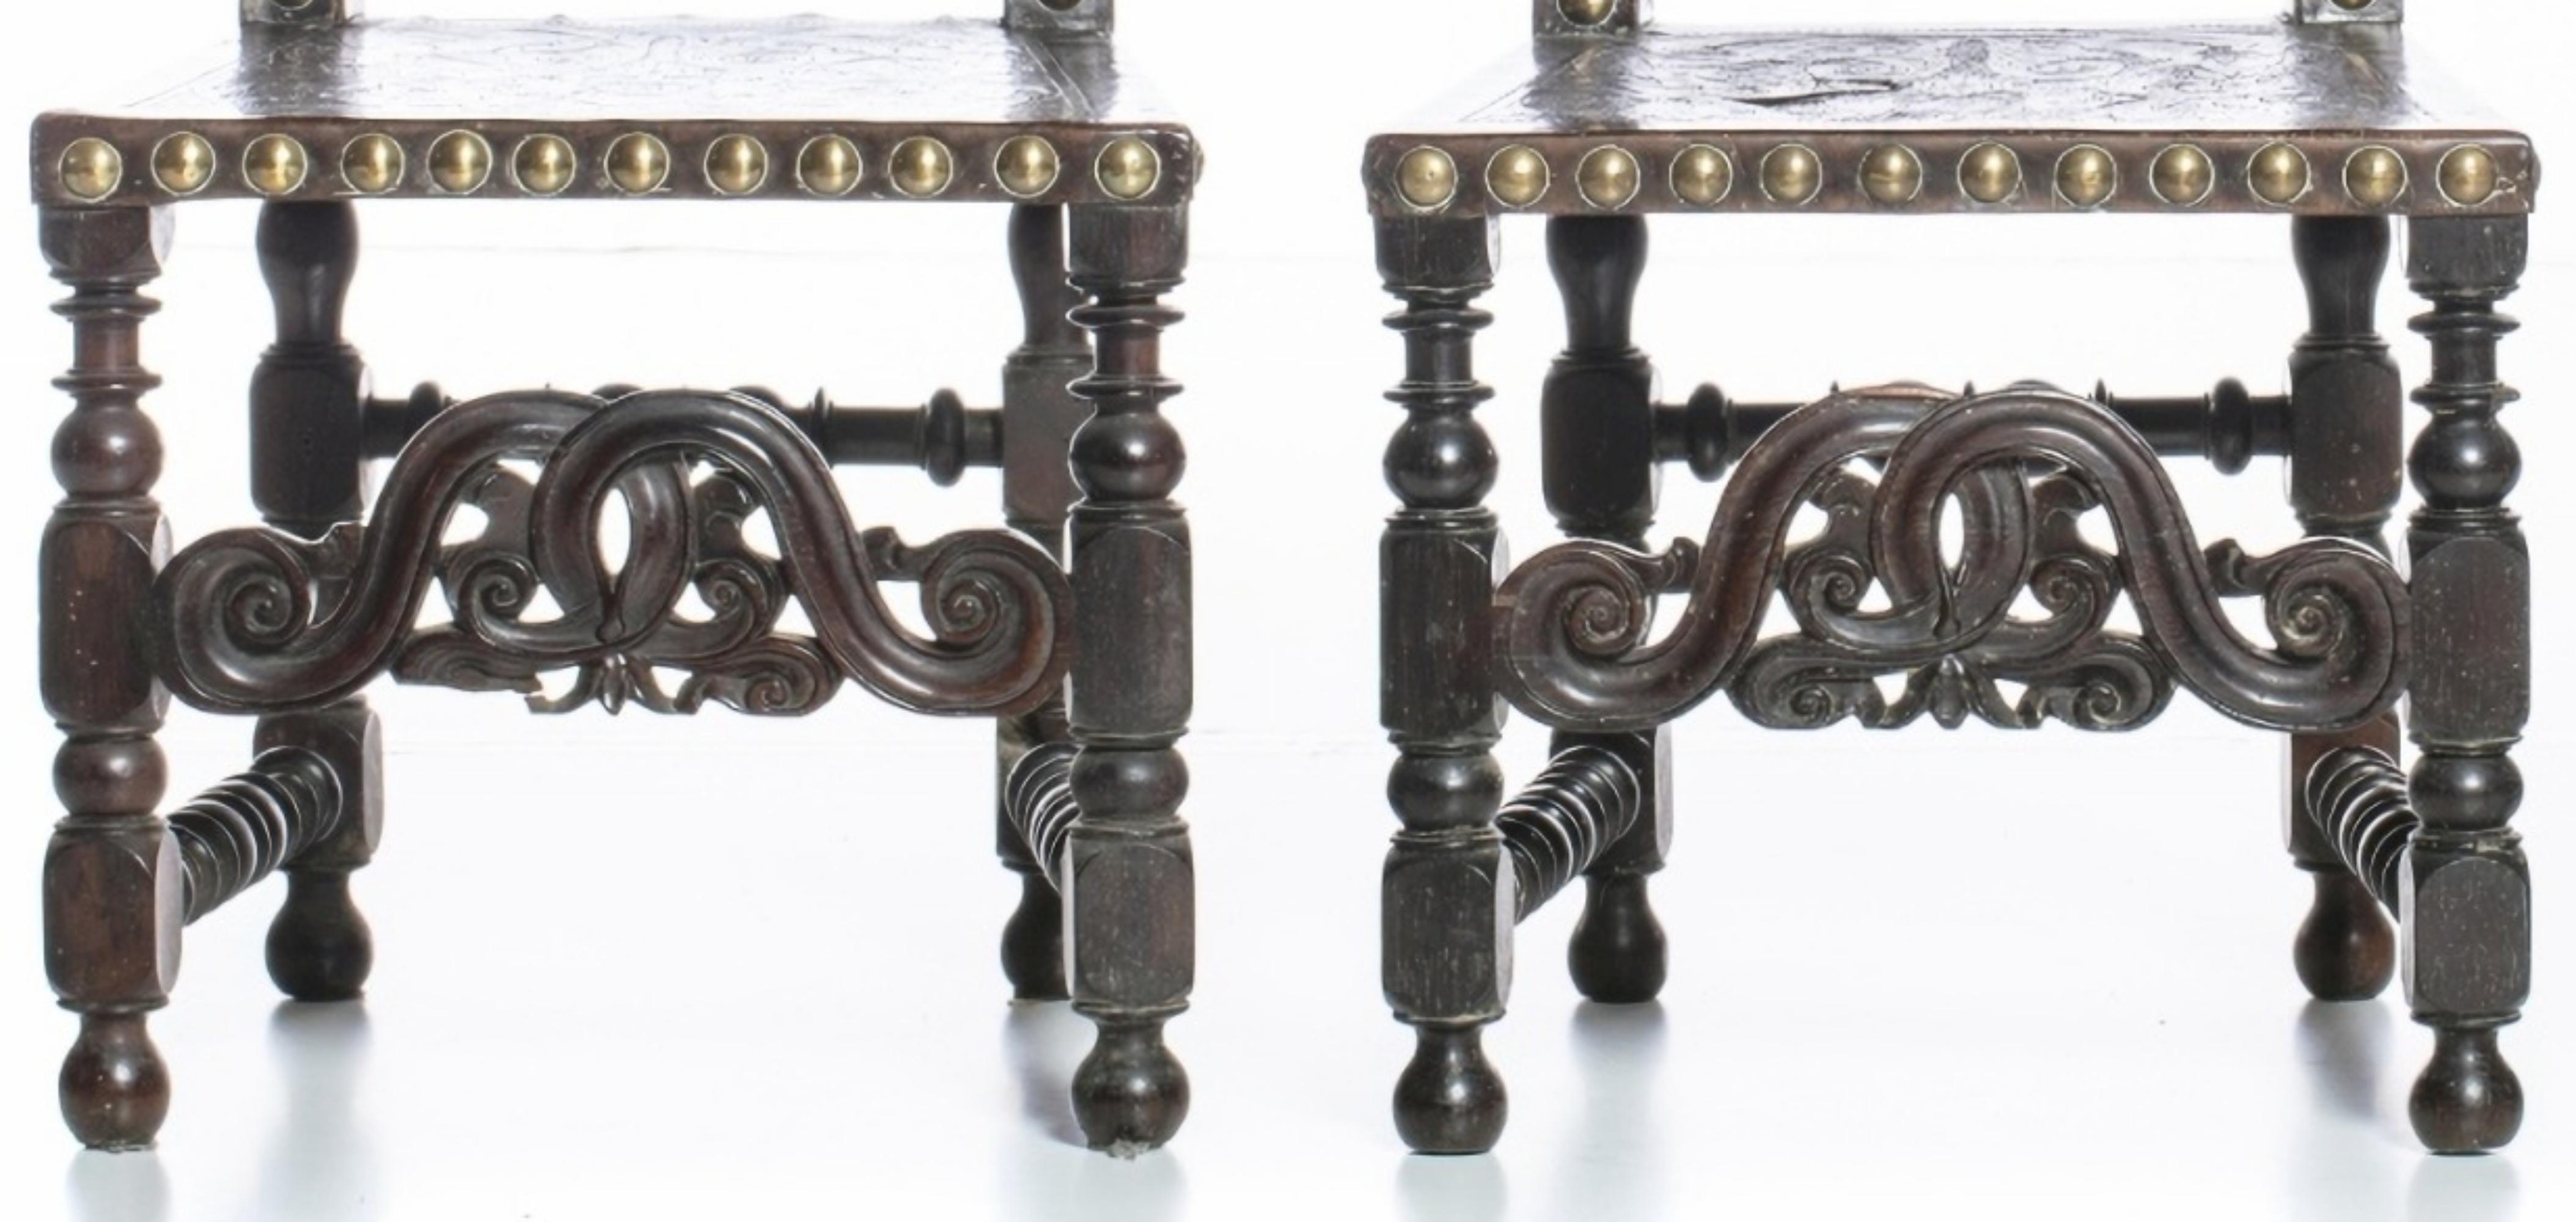 Baroque Pair of 18th Century Portuguese Chairs in Kingwood